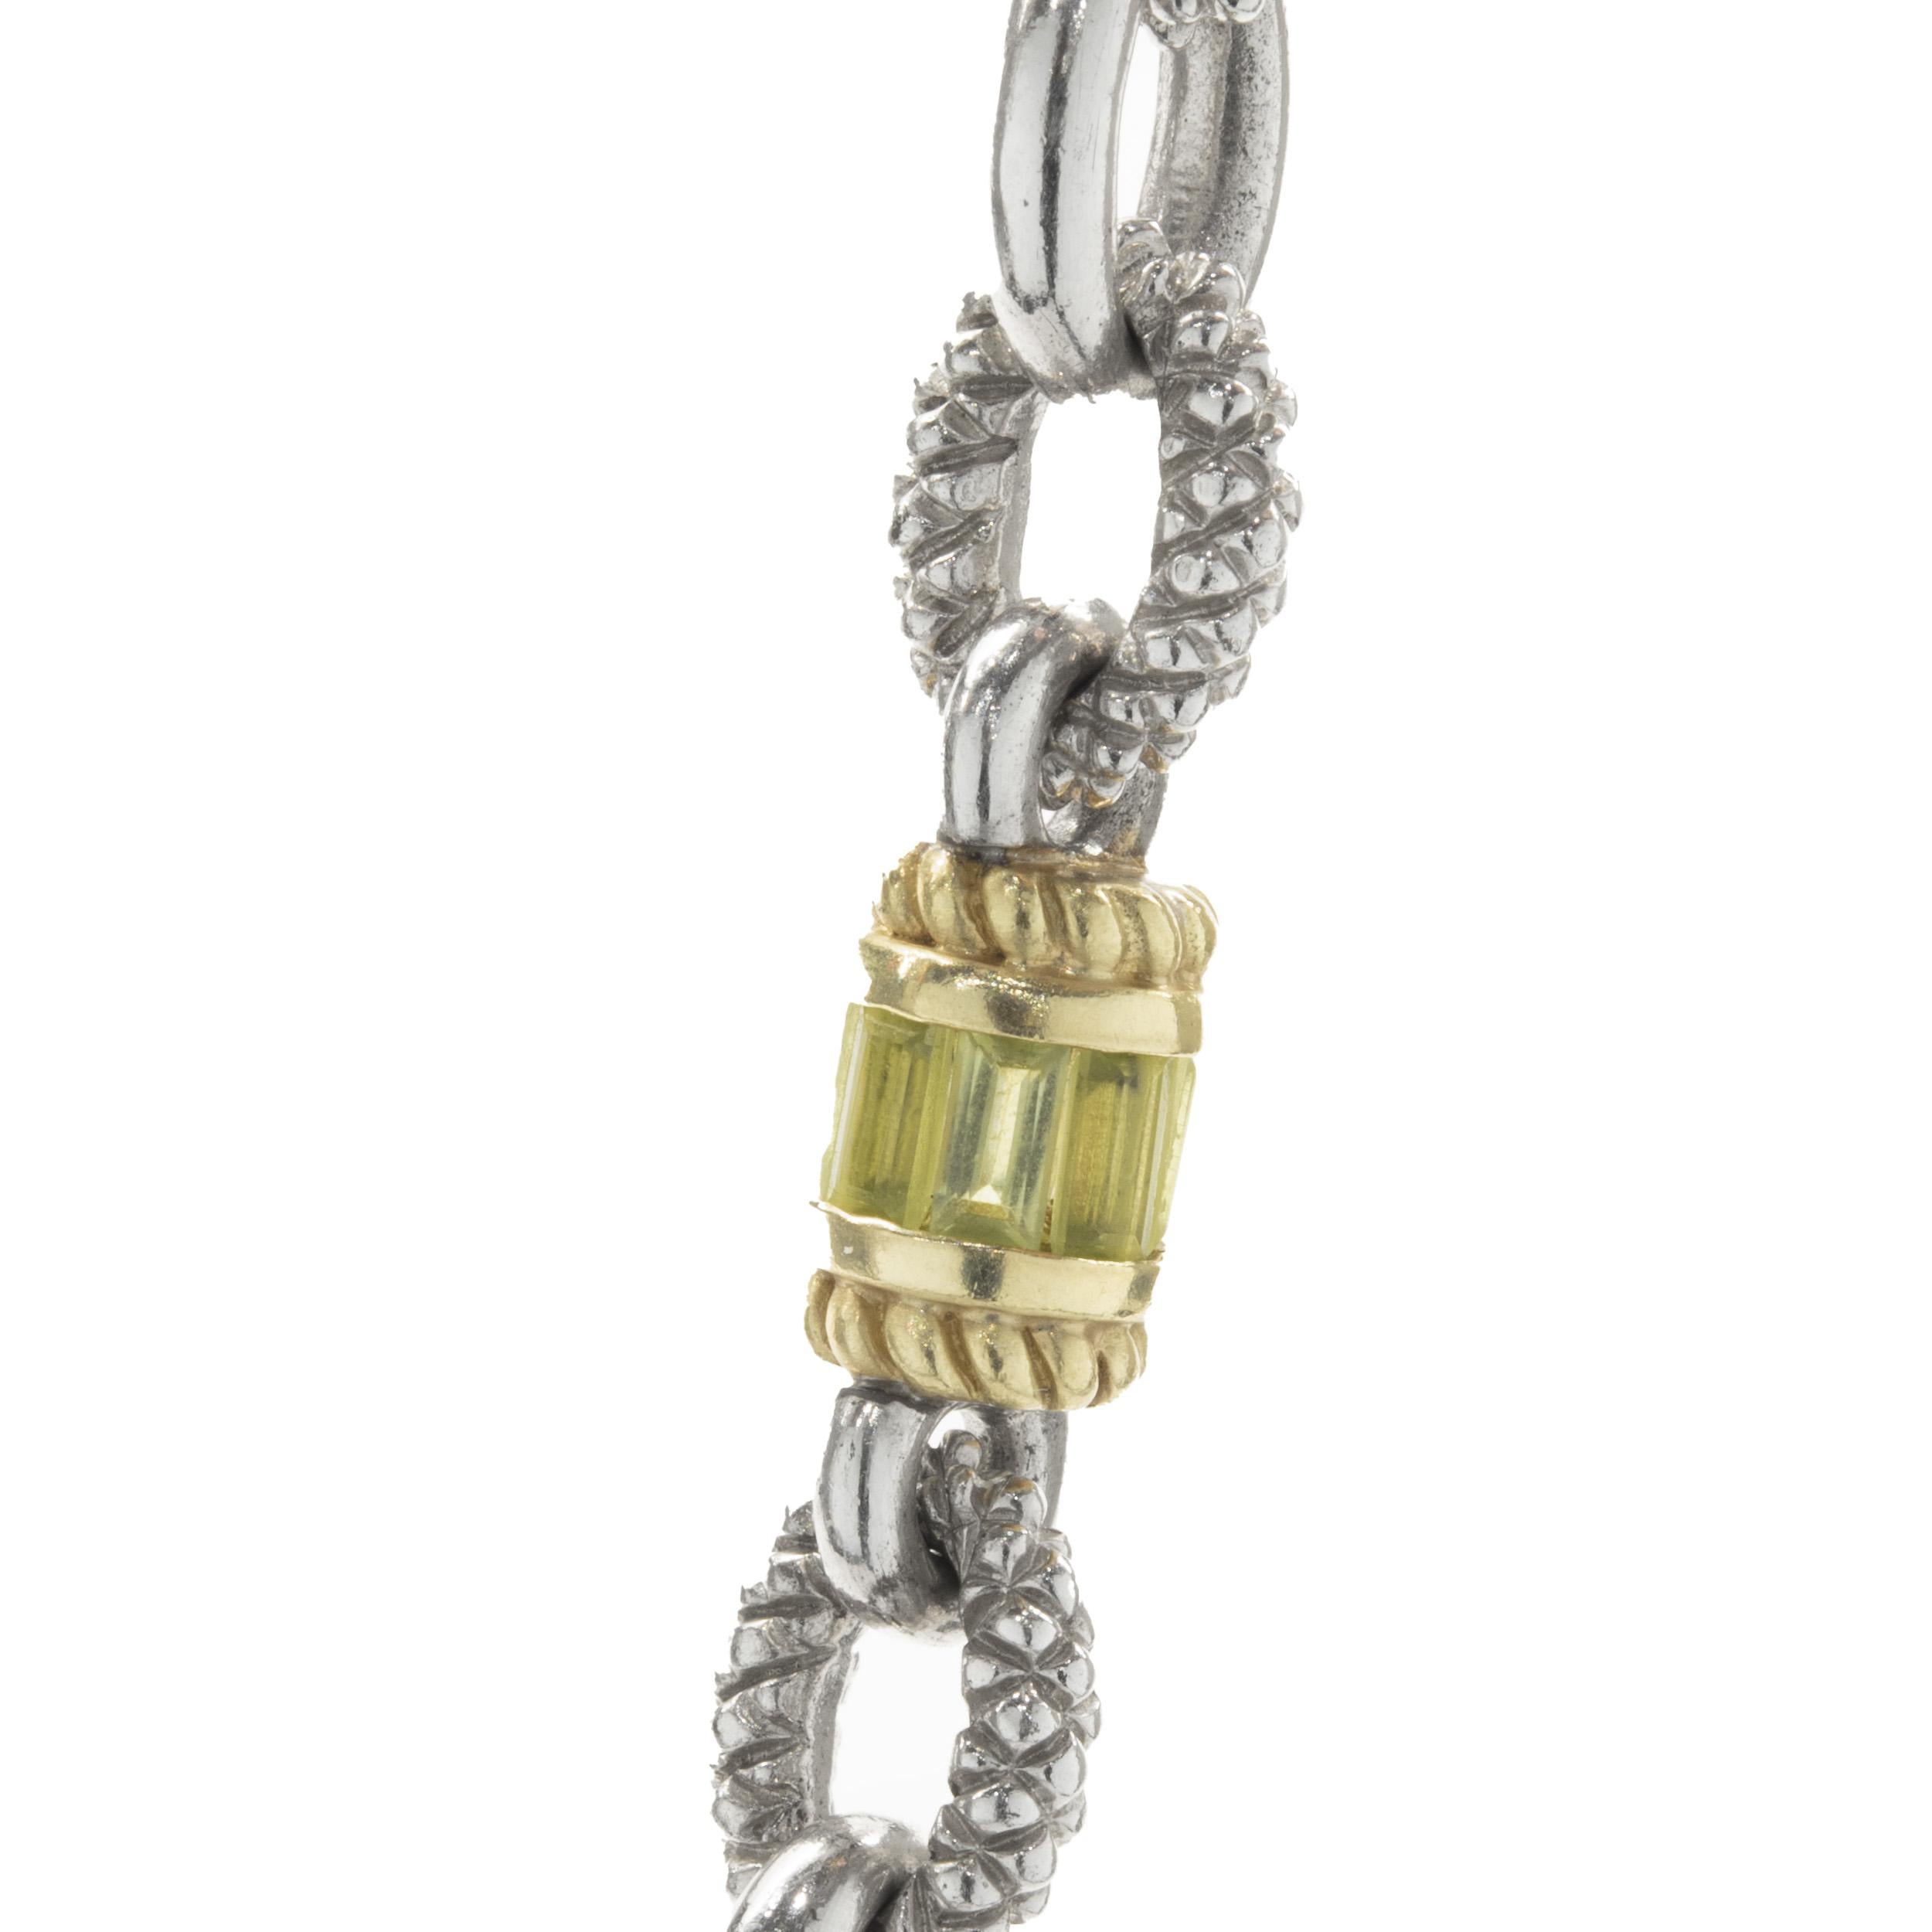 Designer: Judith Ripka
Material: sterling silver / 18K yellow gold
Dimensions: necklace measures 16-inches in length
Weight: 58.90 grams